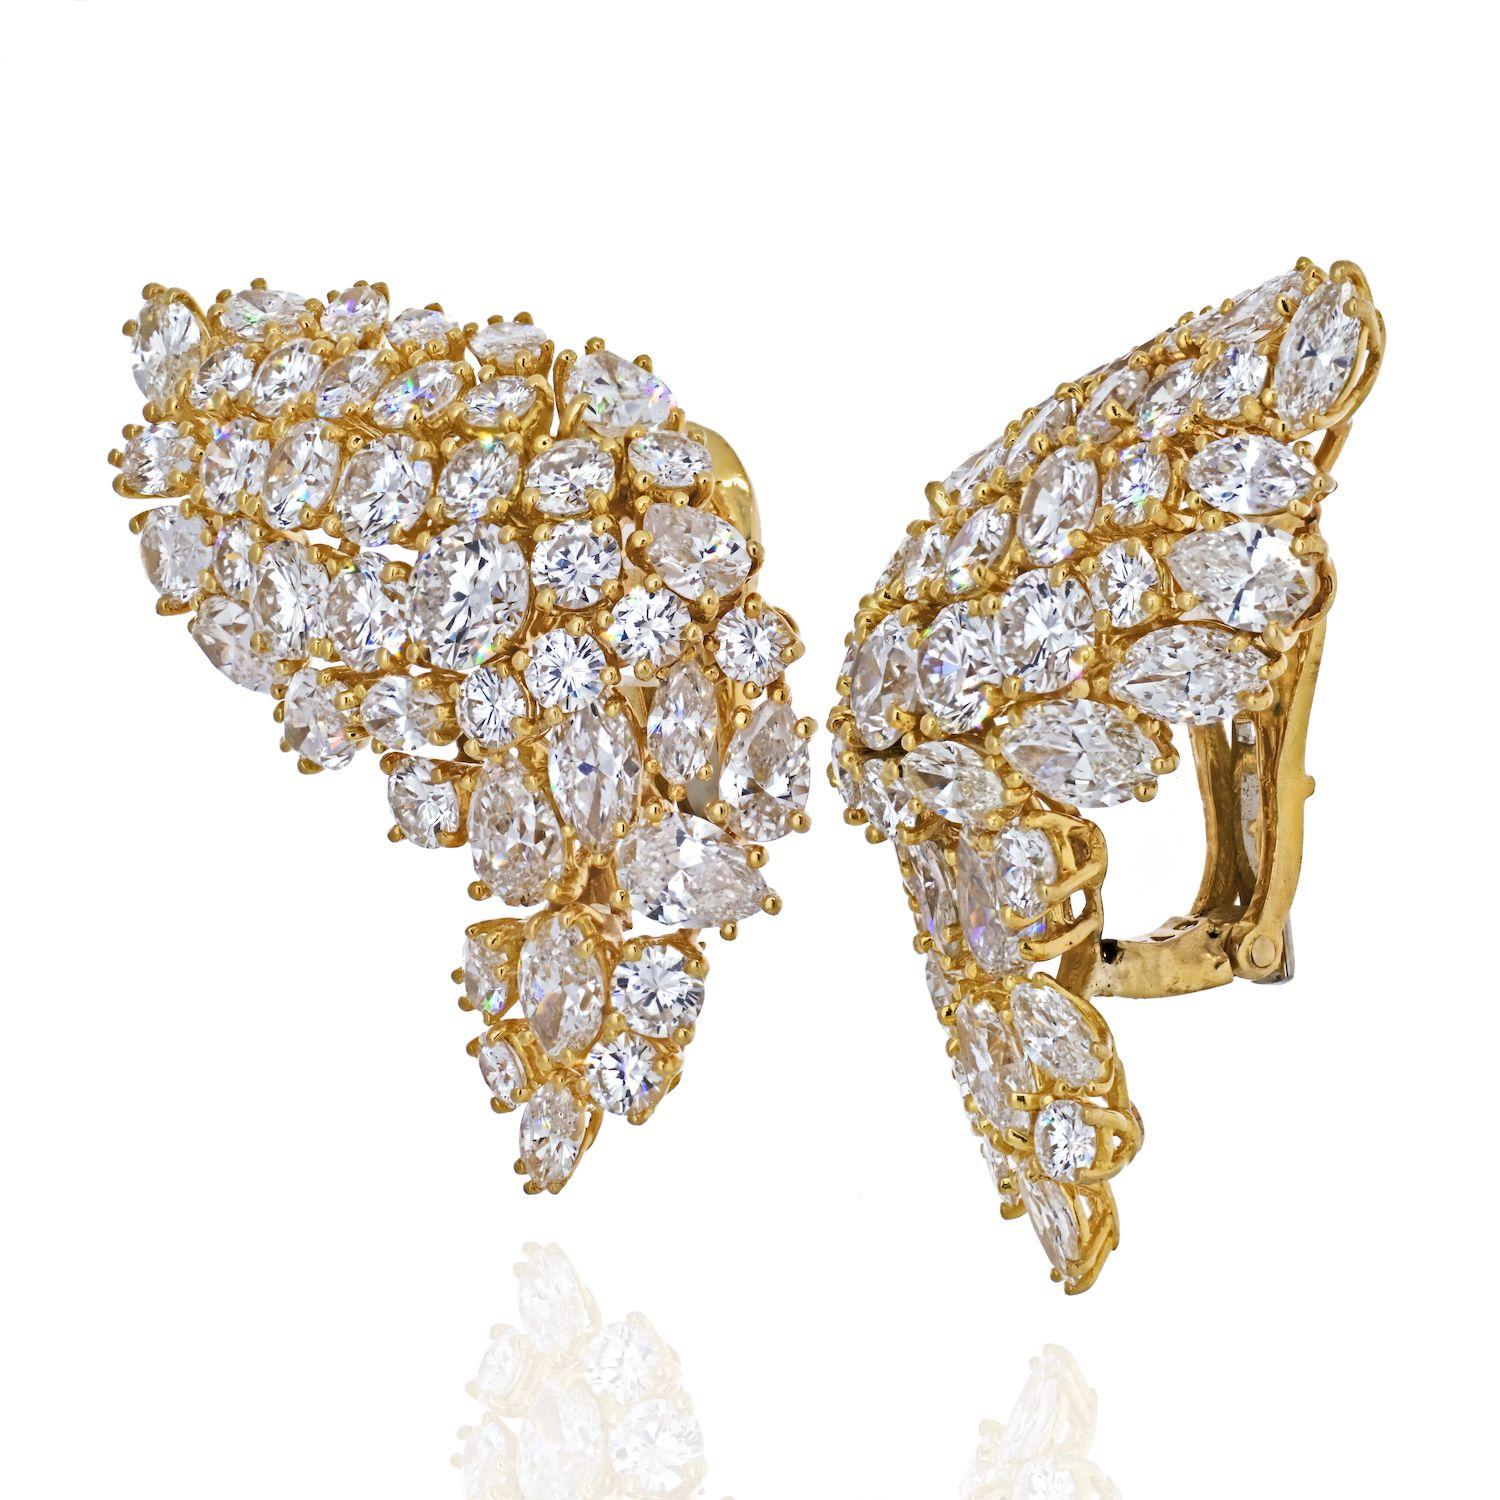 Gorgeous David Webb 18K Yellow Gold 11.75cts Diamond Wing Clip-On Earrings. Fashioned in a 